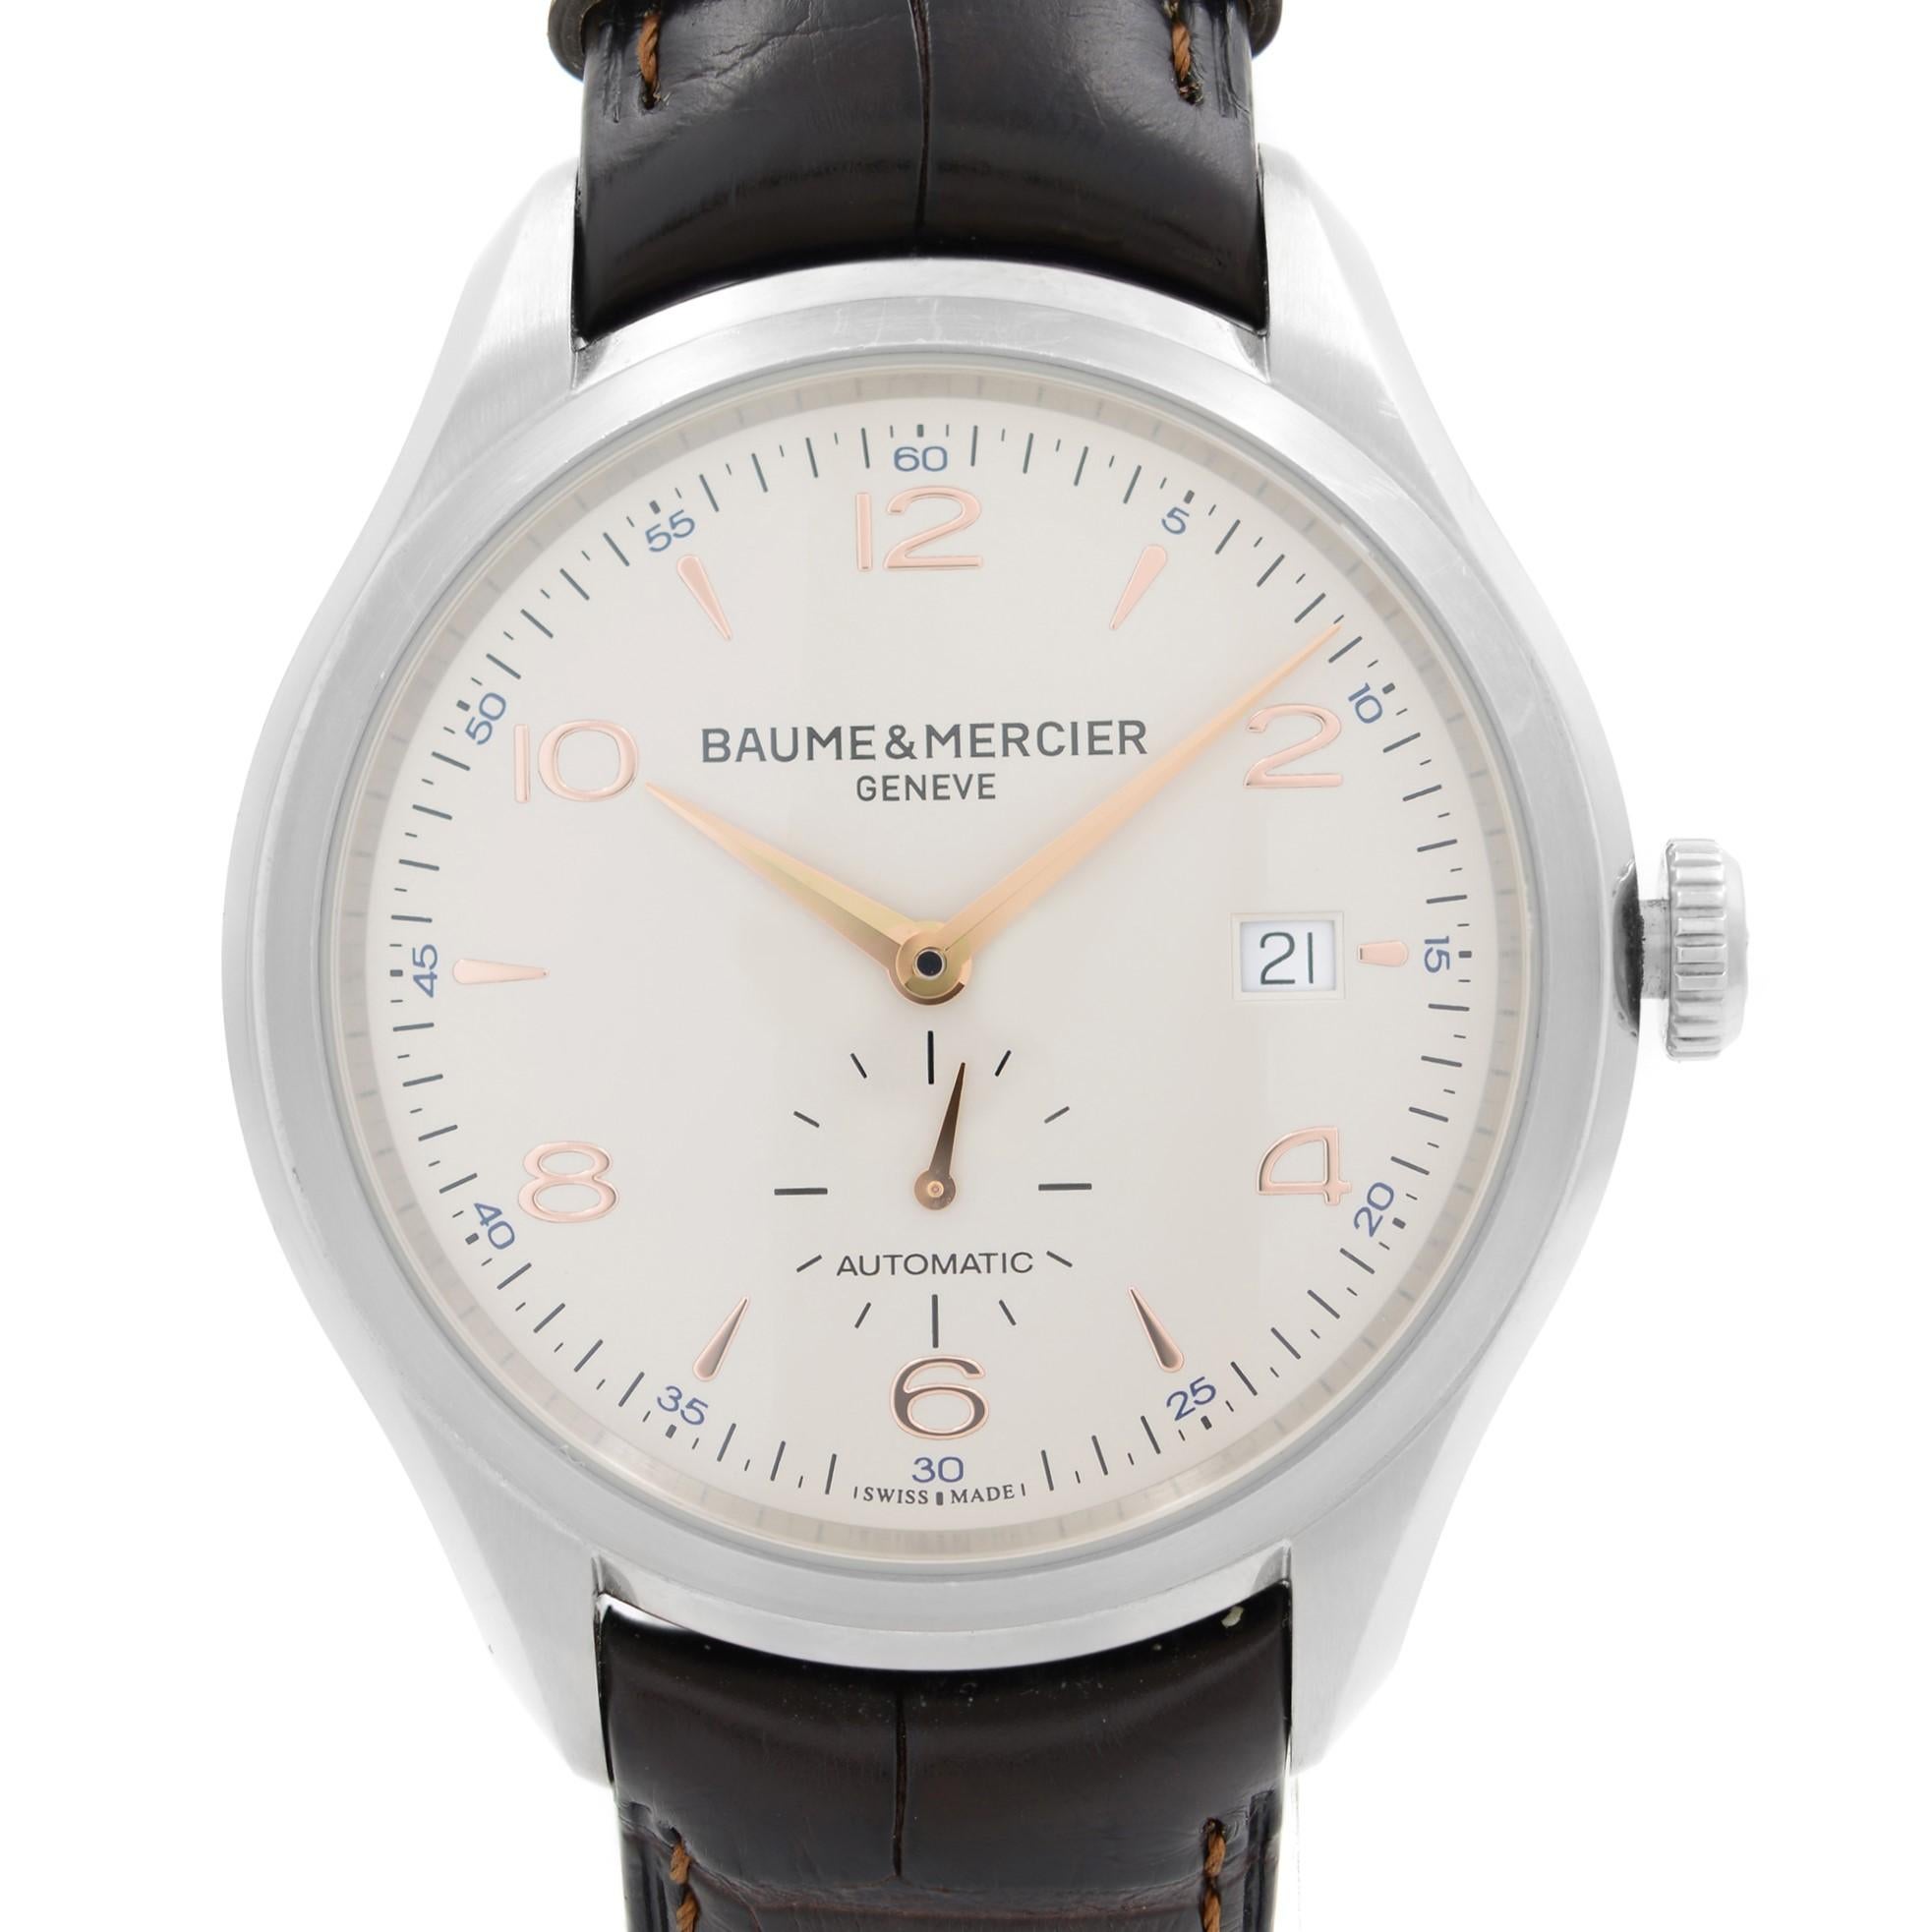 Pre-owned Baume & Mercier Clifton 41mm Steel Silver Dial Automatic Men's Watch M0A10054. The Watch Band Show wear and sweat signs on the Inner Side. No Original Box and Papers are Included. Comes with Chronostore Presentation Box and Authenticity